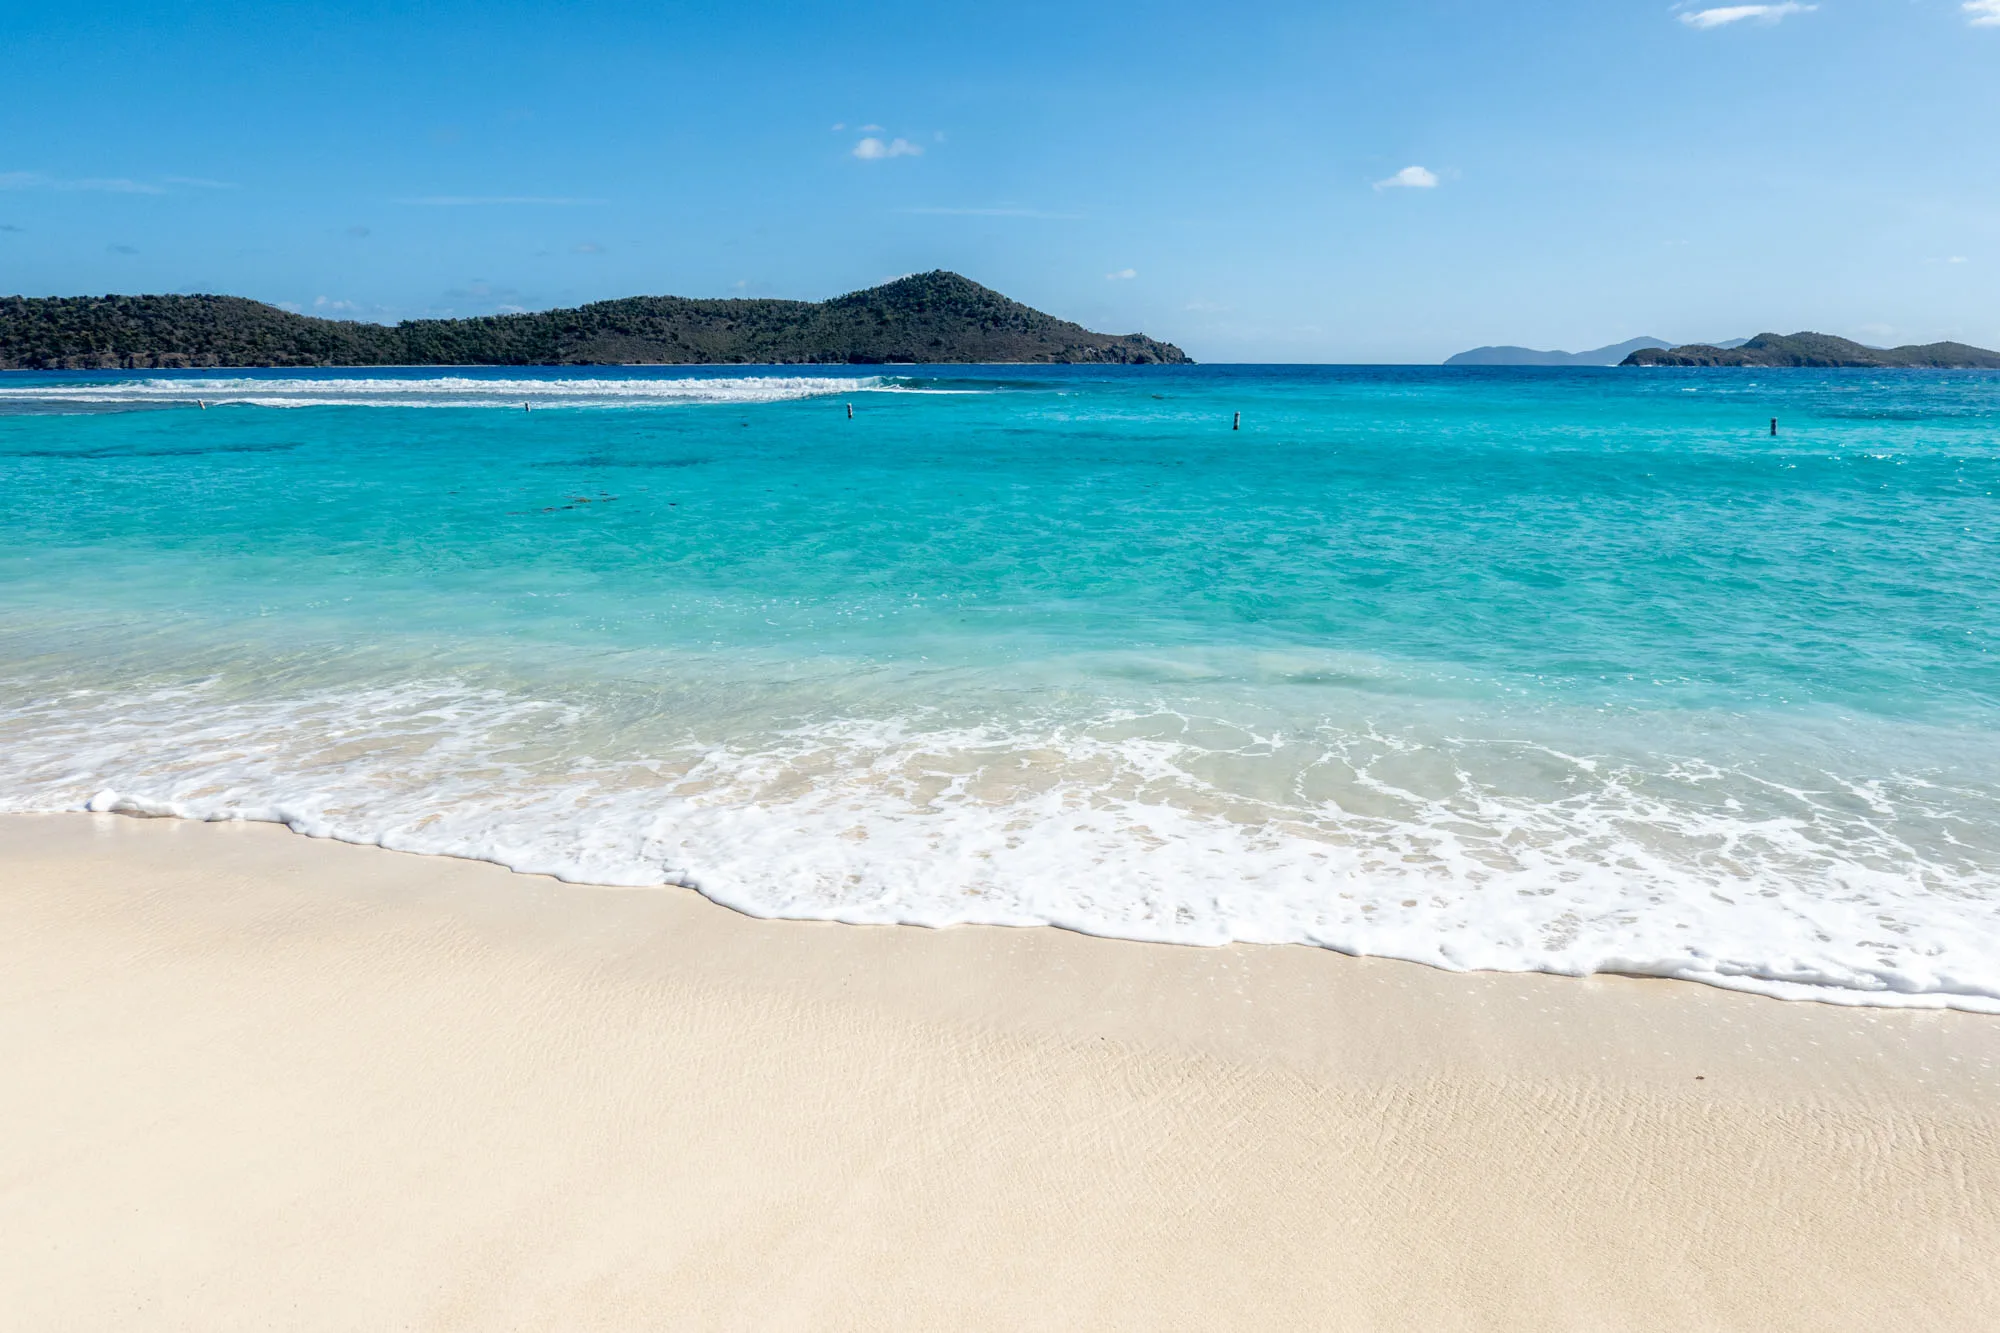 Blue ocean water and a white sand beach with hilly islands in the distance in St. Thomas